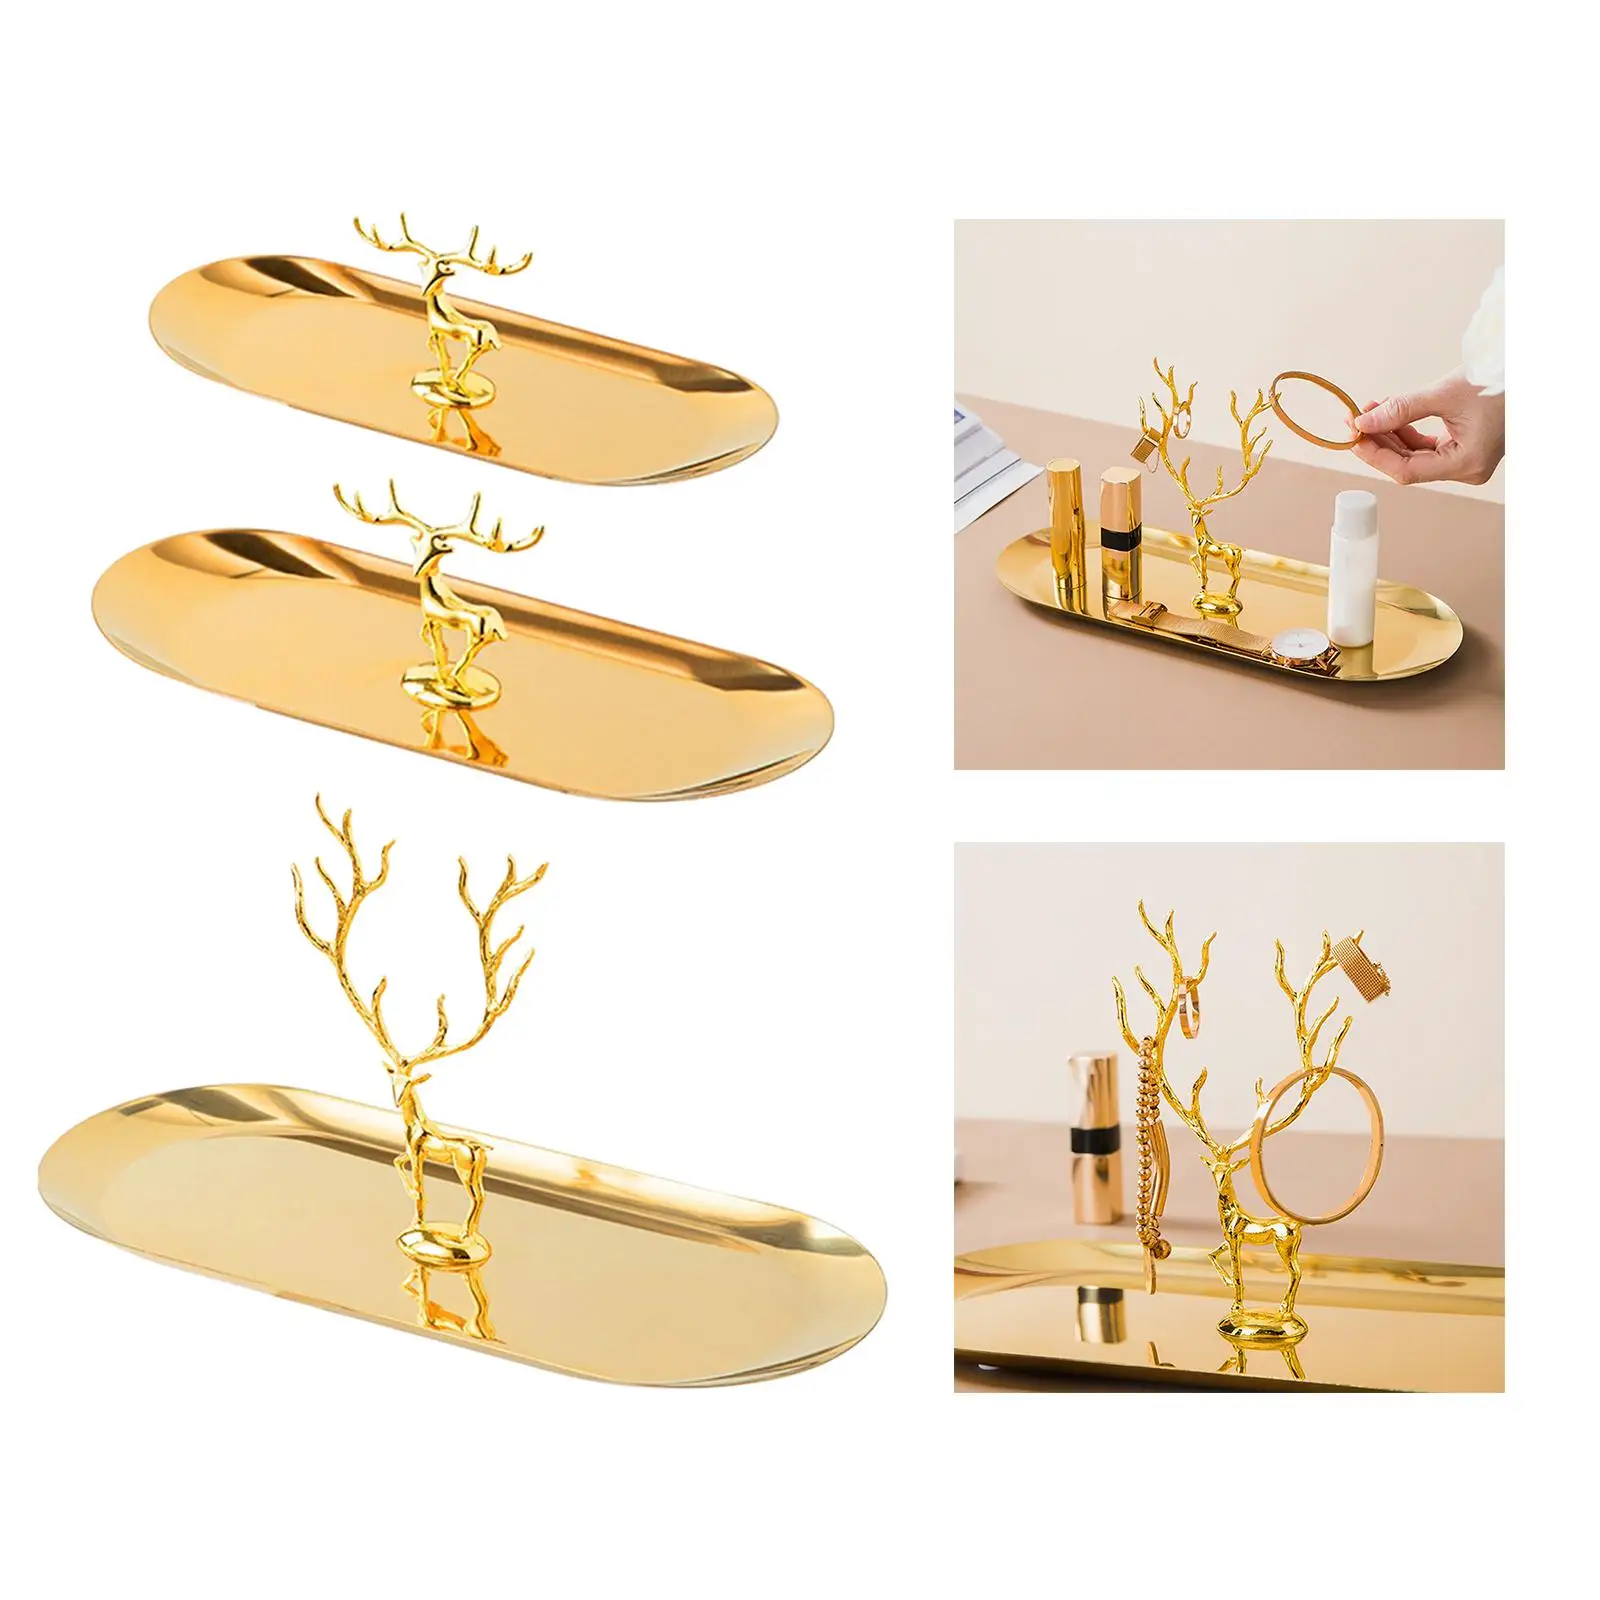 Golden Jewelry Tray Jewelry Organizer Cosmetic Tray Display Tray Metal Tray with Elk Dish for Glasses Bracelets Bedroom Dresser